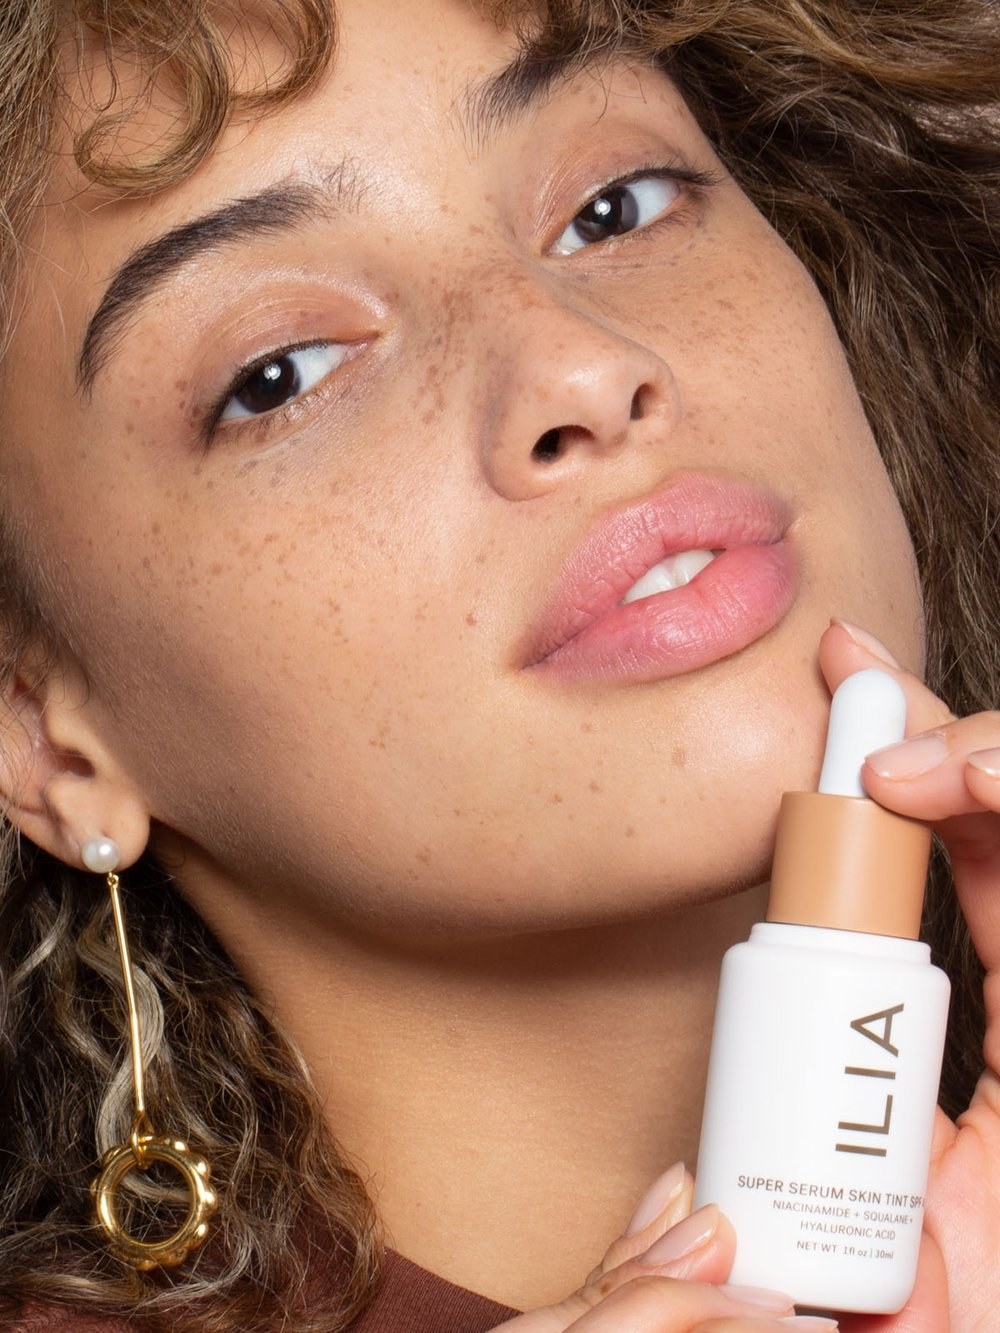 A model holding the skin tint bottle with a dropper top close to her face